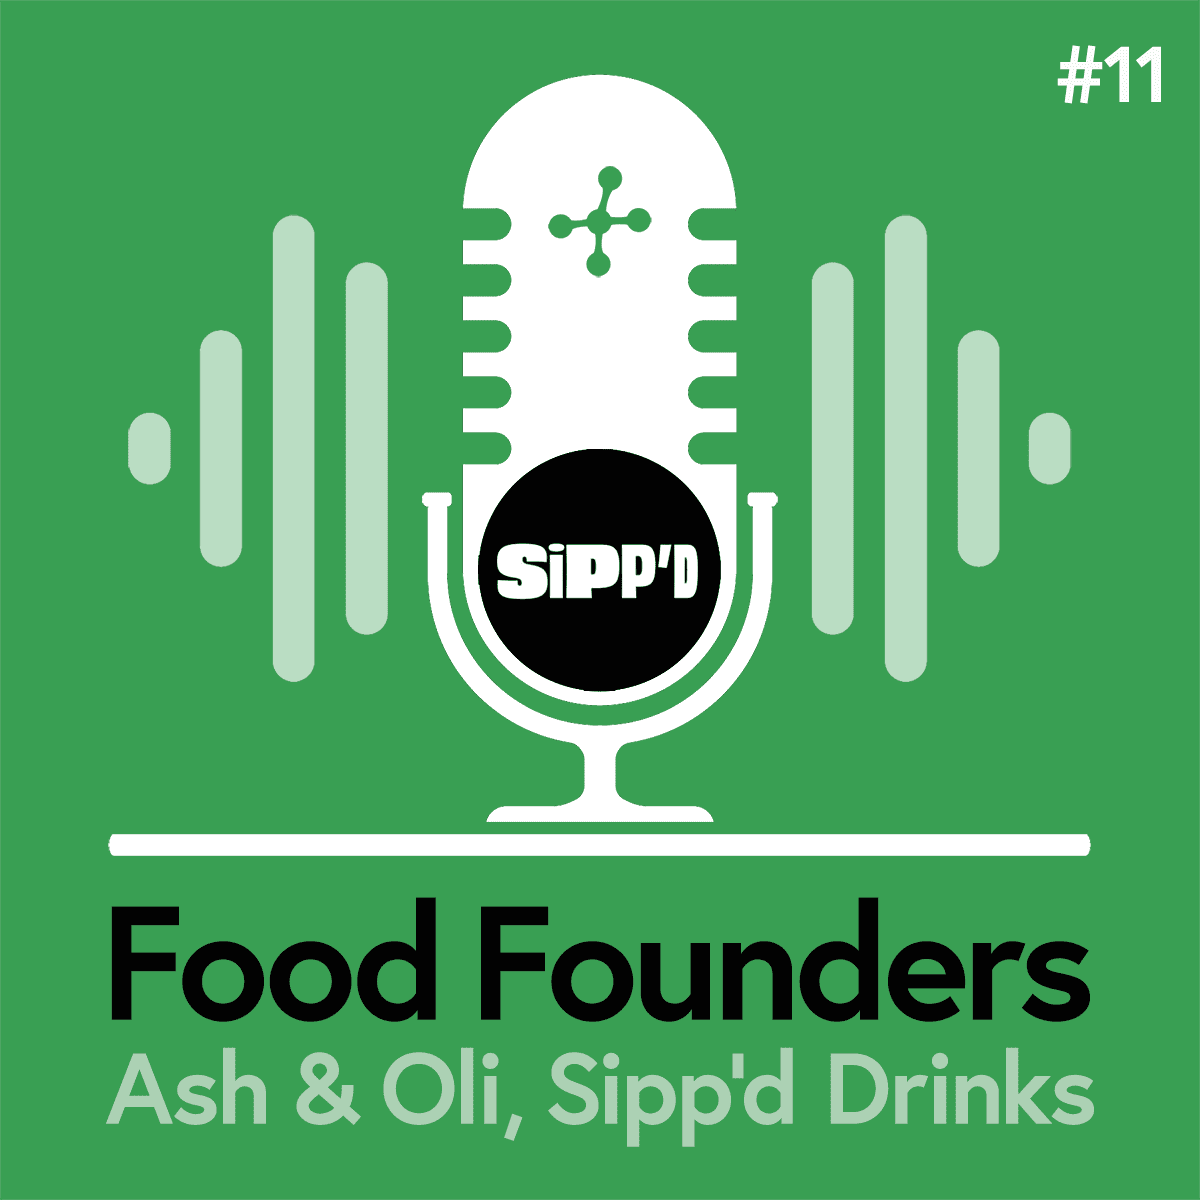 Sipp'd: a drinks business with a twist